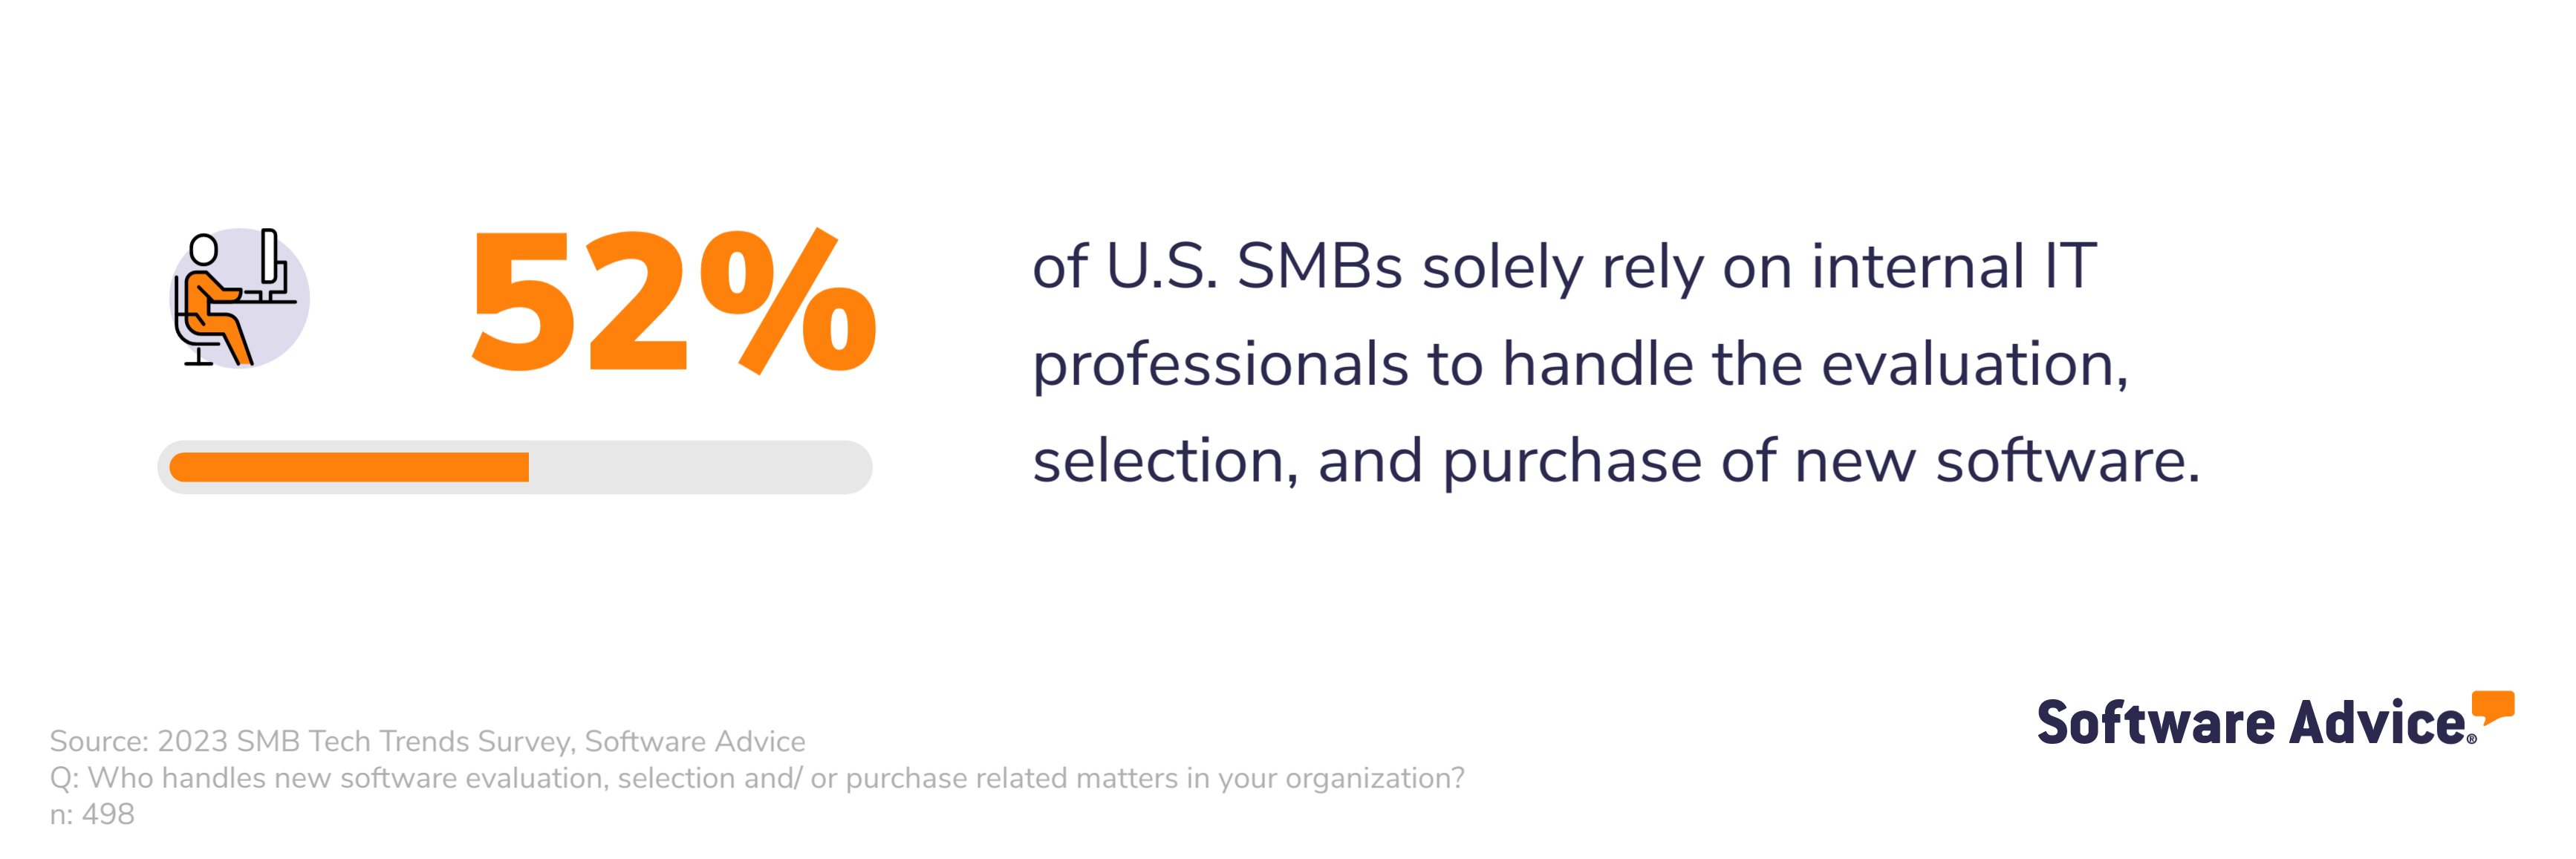 A graphic showing that 52% of SMBs rely on their IT department to handle the evaluation, selection, and purchase of new software